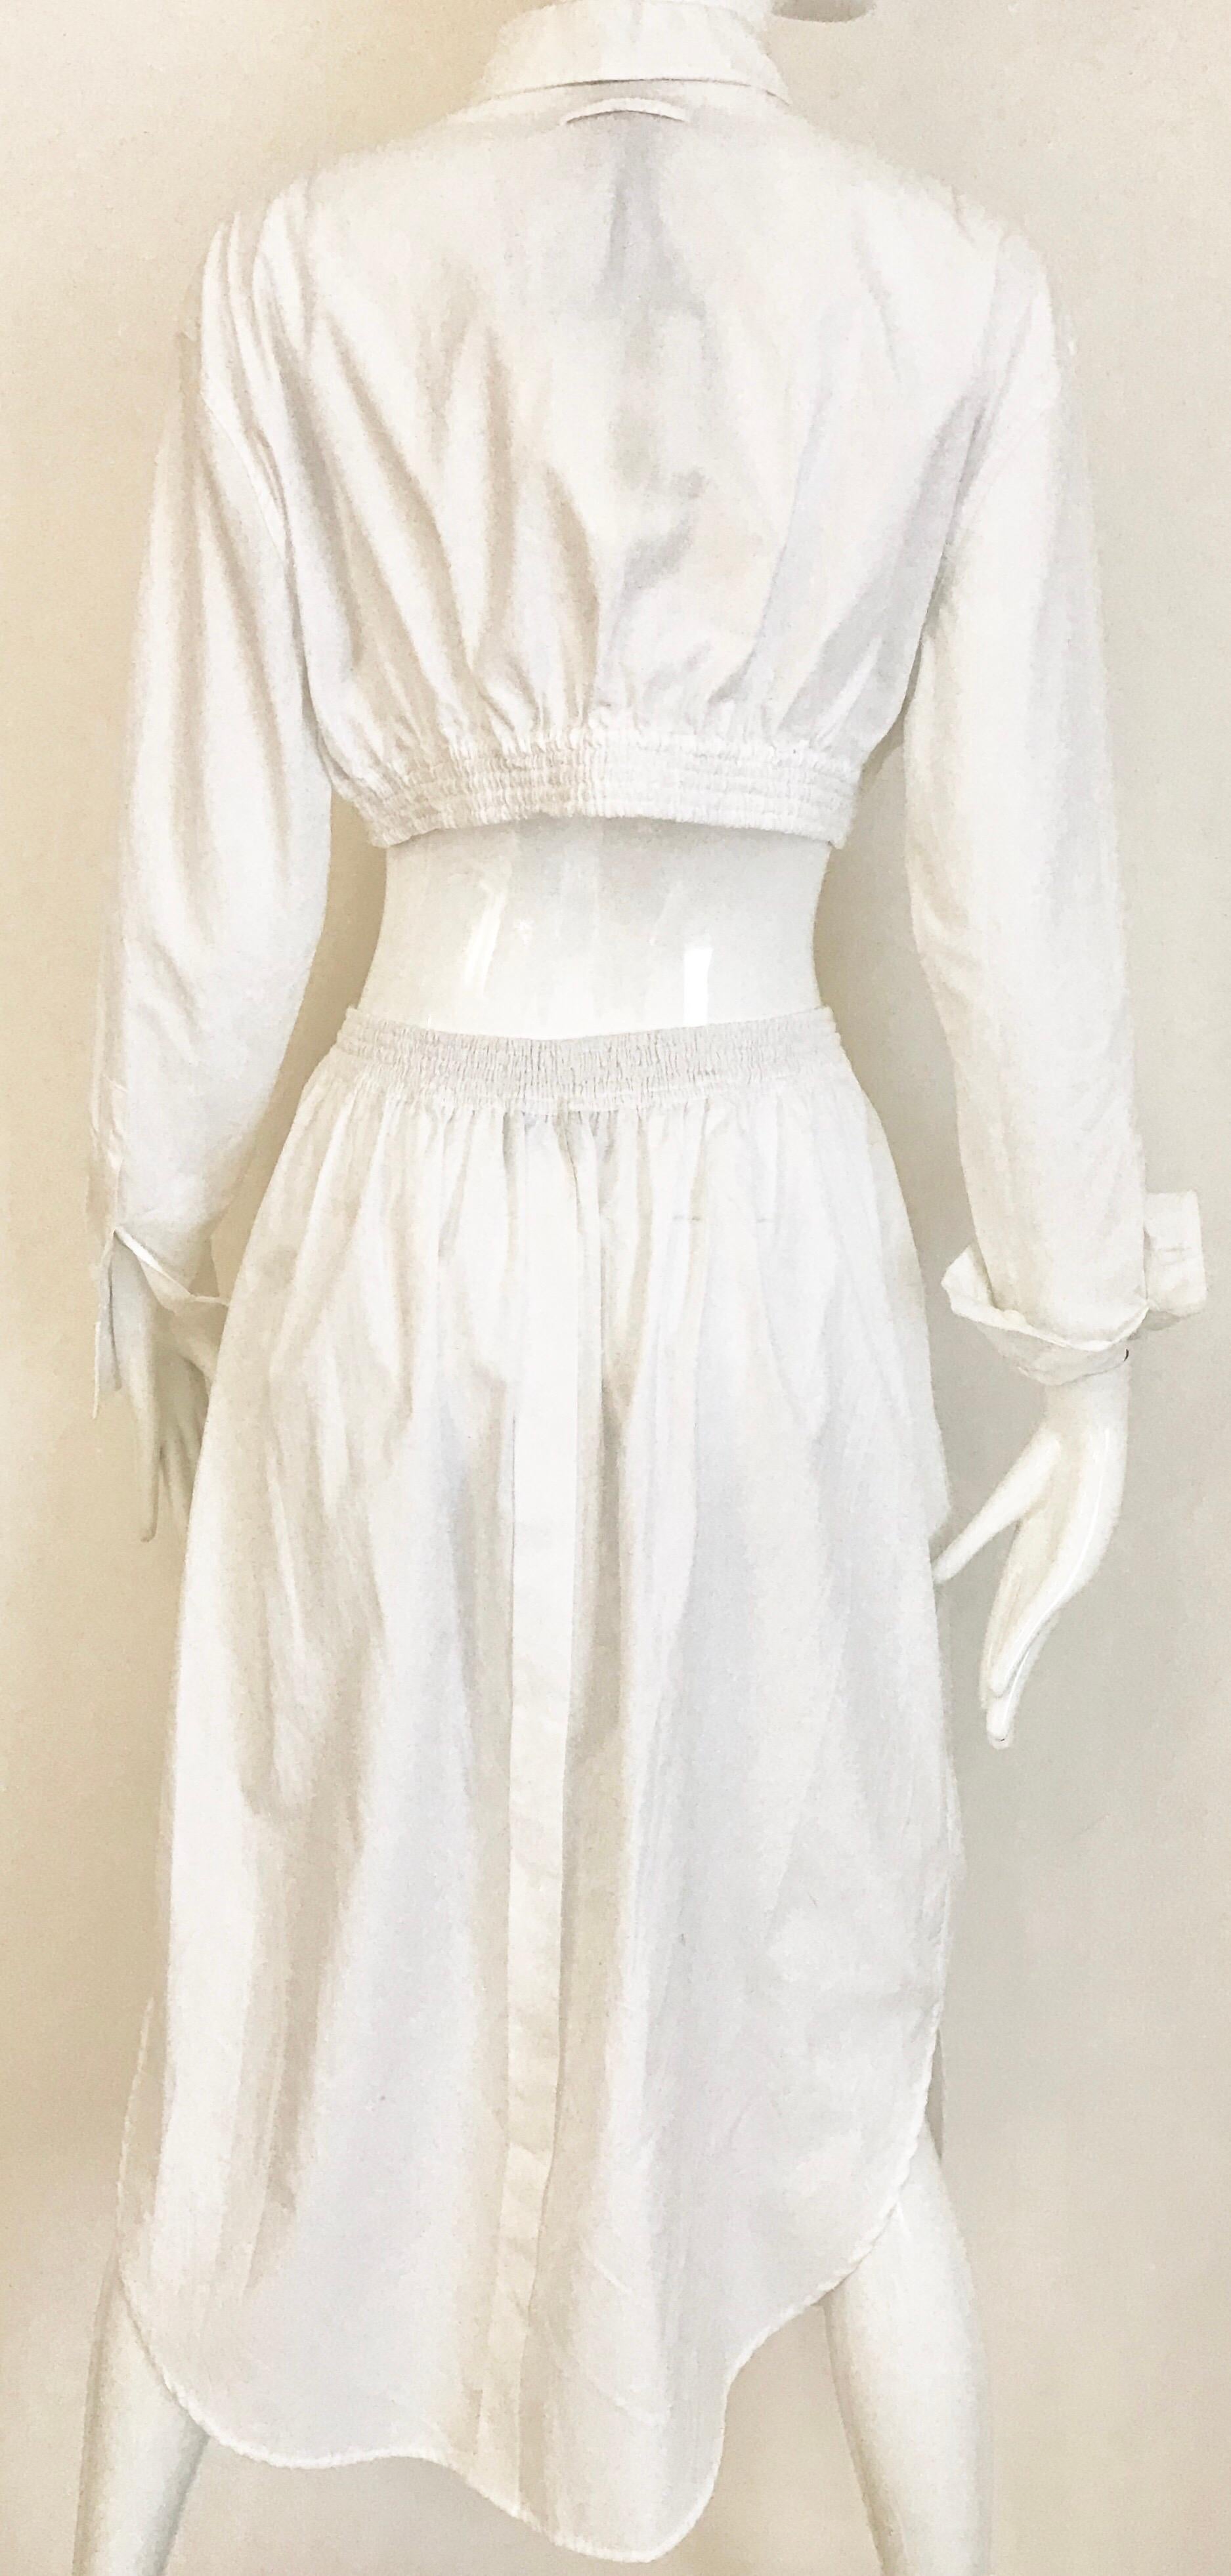 This Jean Paul Gaultier white crop top and skirt combo is from the 2000’s era.  It’s 100% cotton and has a great feel.  Very casual, but sexy and bit edgy, as Gautier tends to be.  The top has an elastic enclosure at the bottom and the skirt has